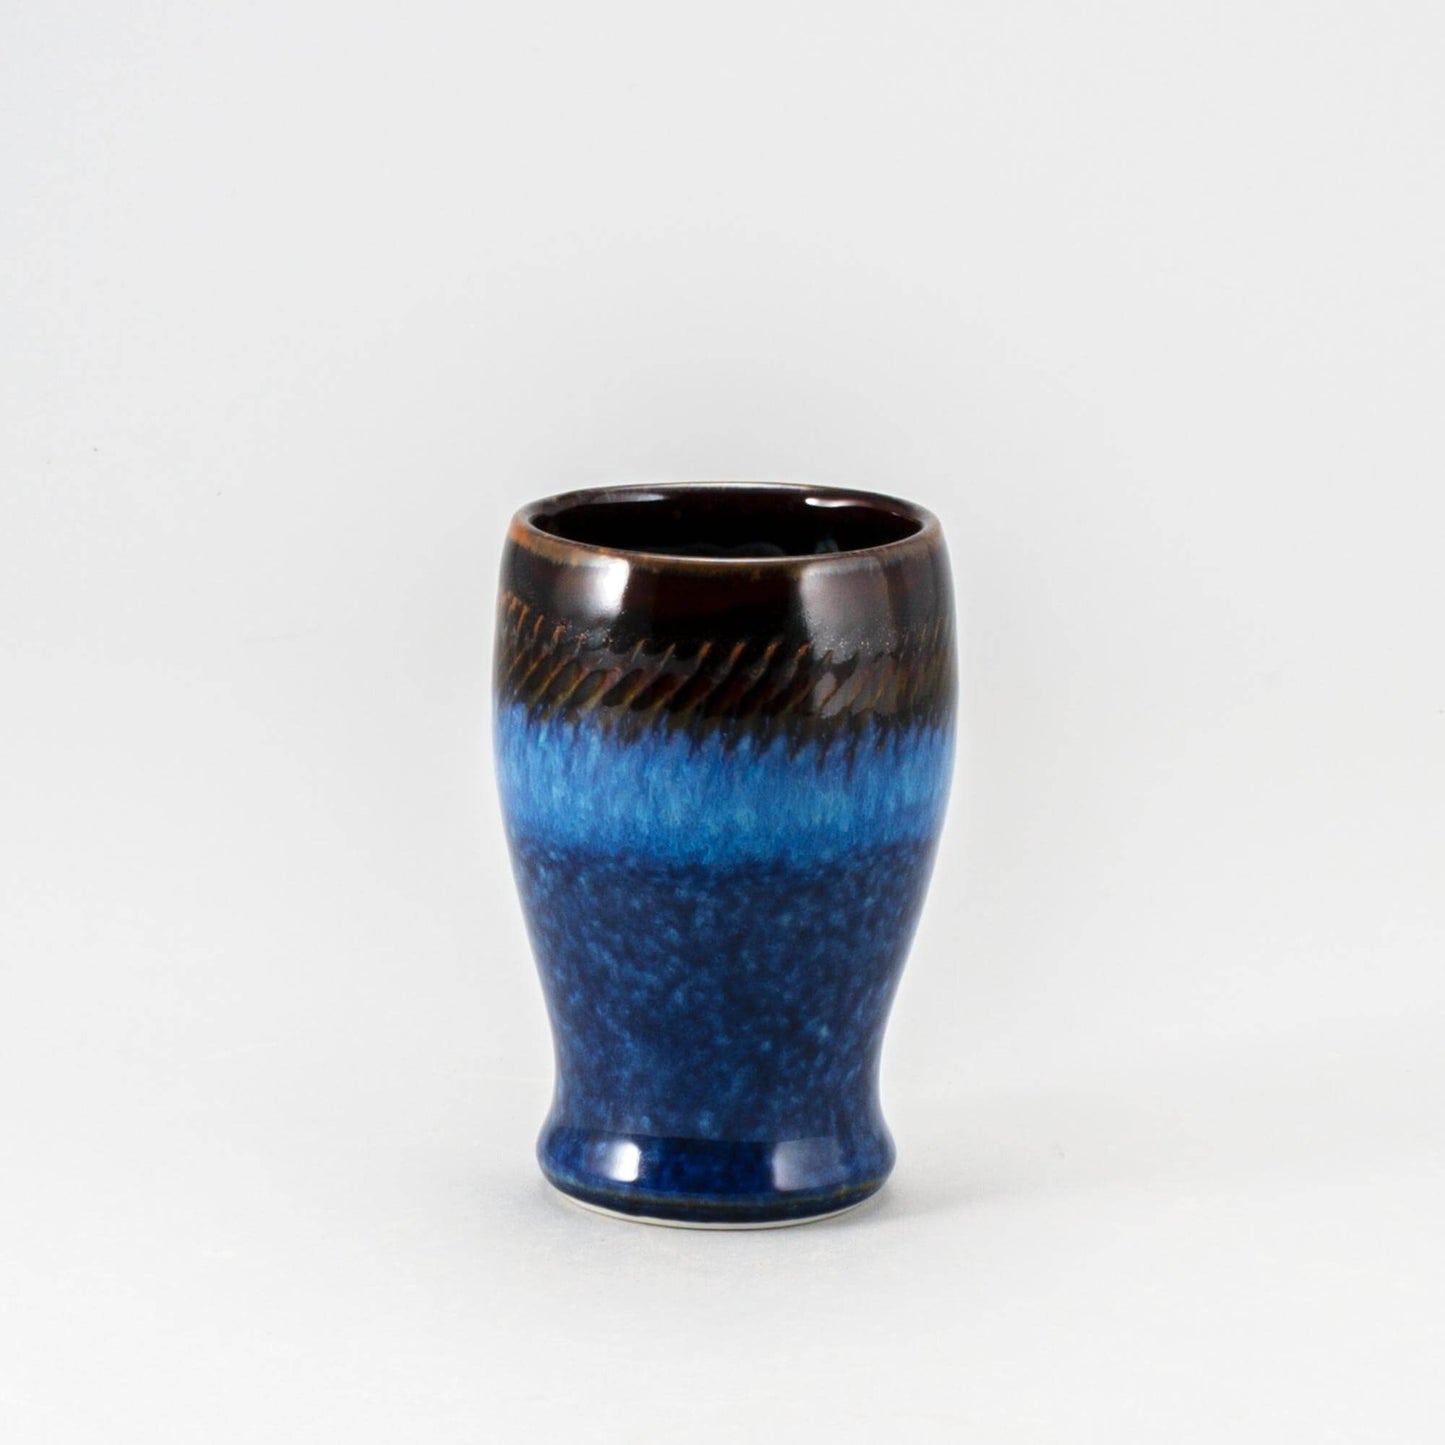 Handmade Pottery Curvy Tumbler in Blue Hamada pattern made by Georgetown Pottery in Maine